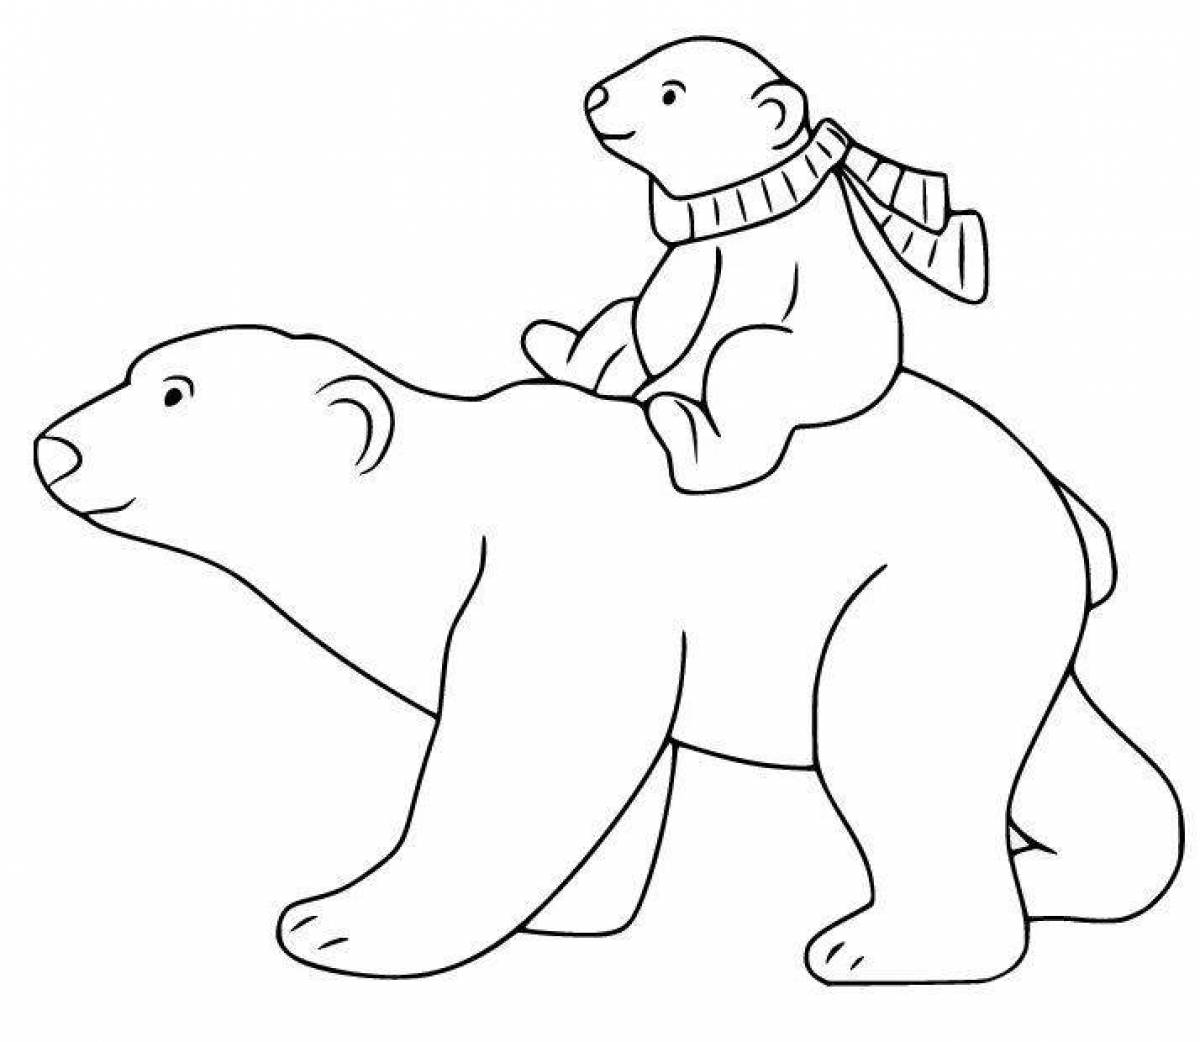 Colorful polar bear coloring page